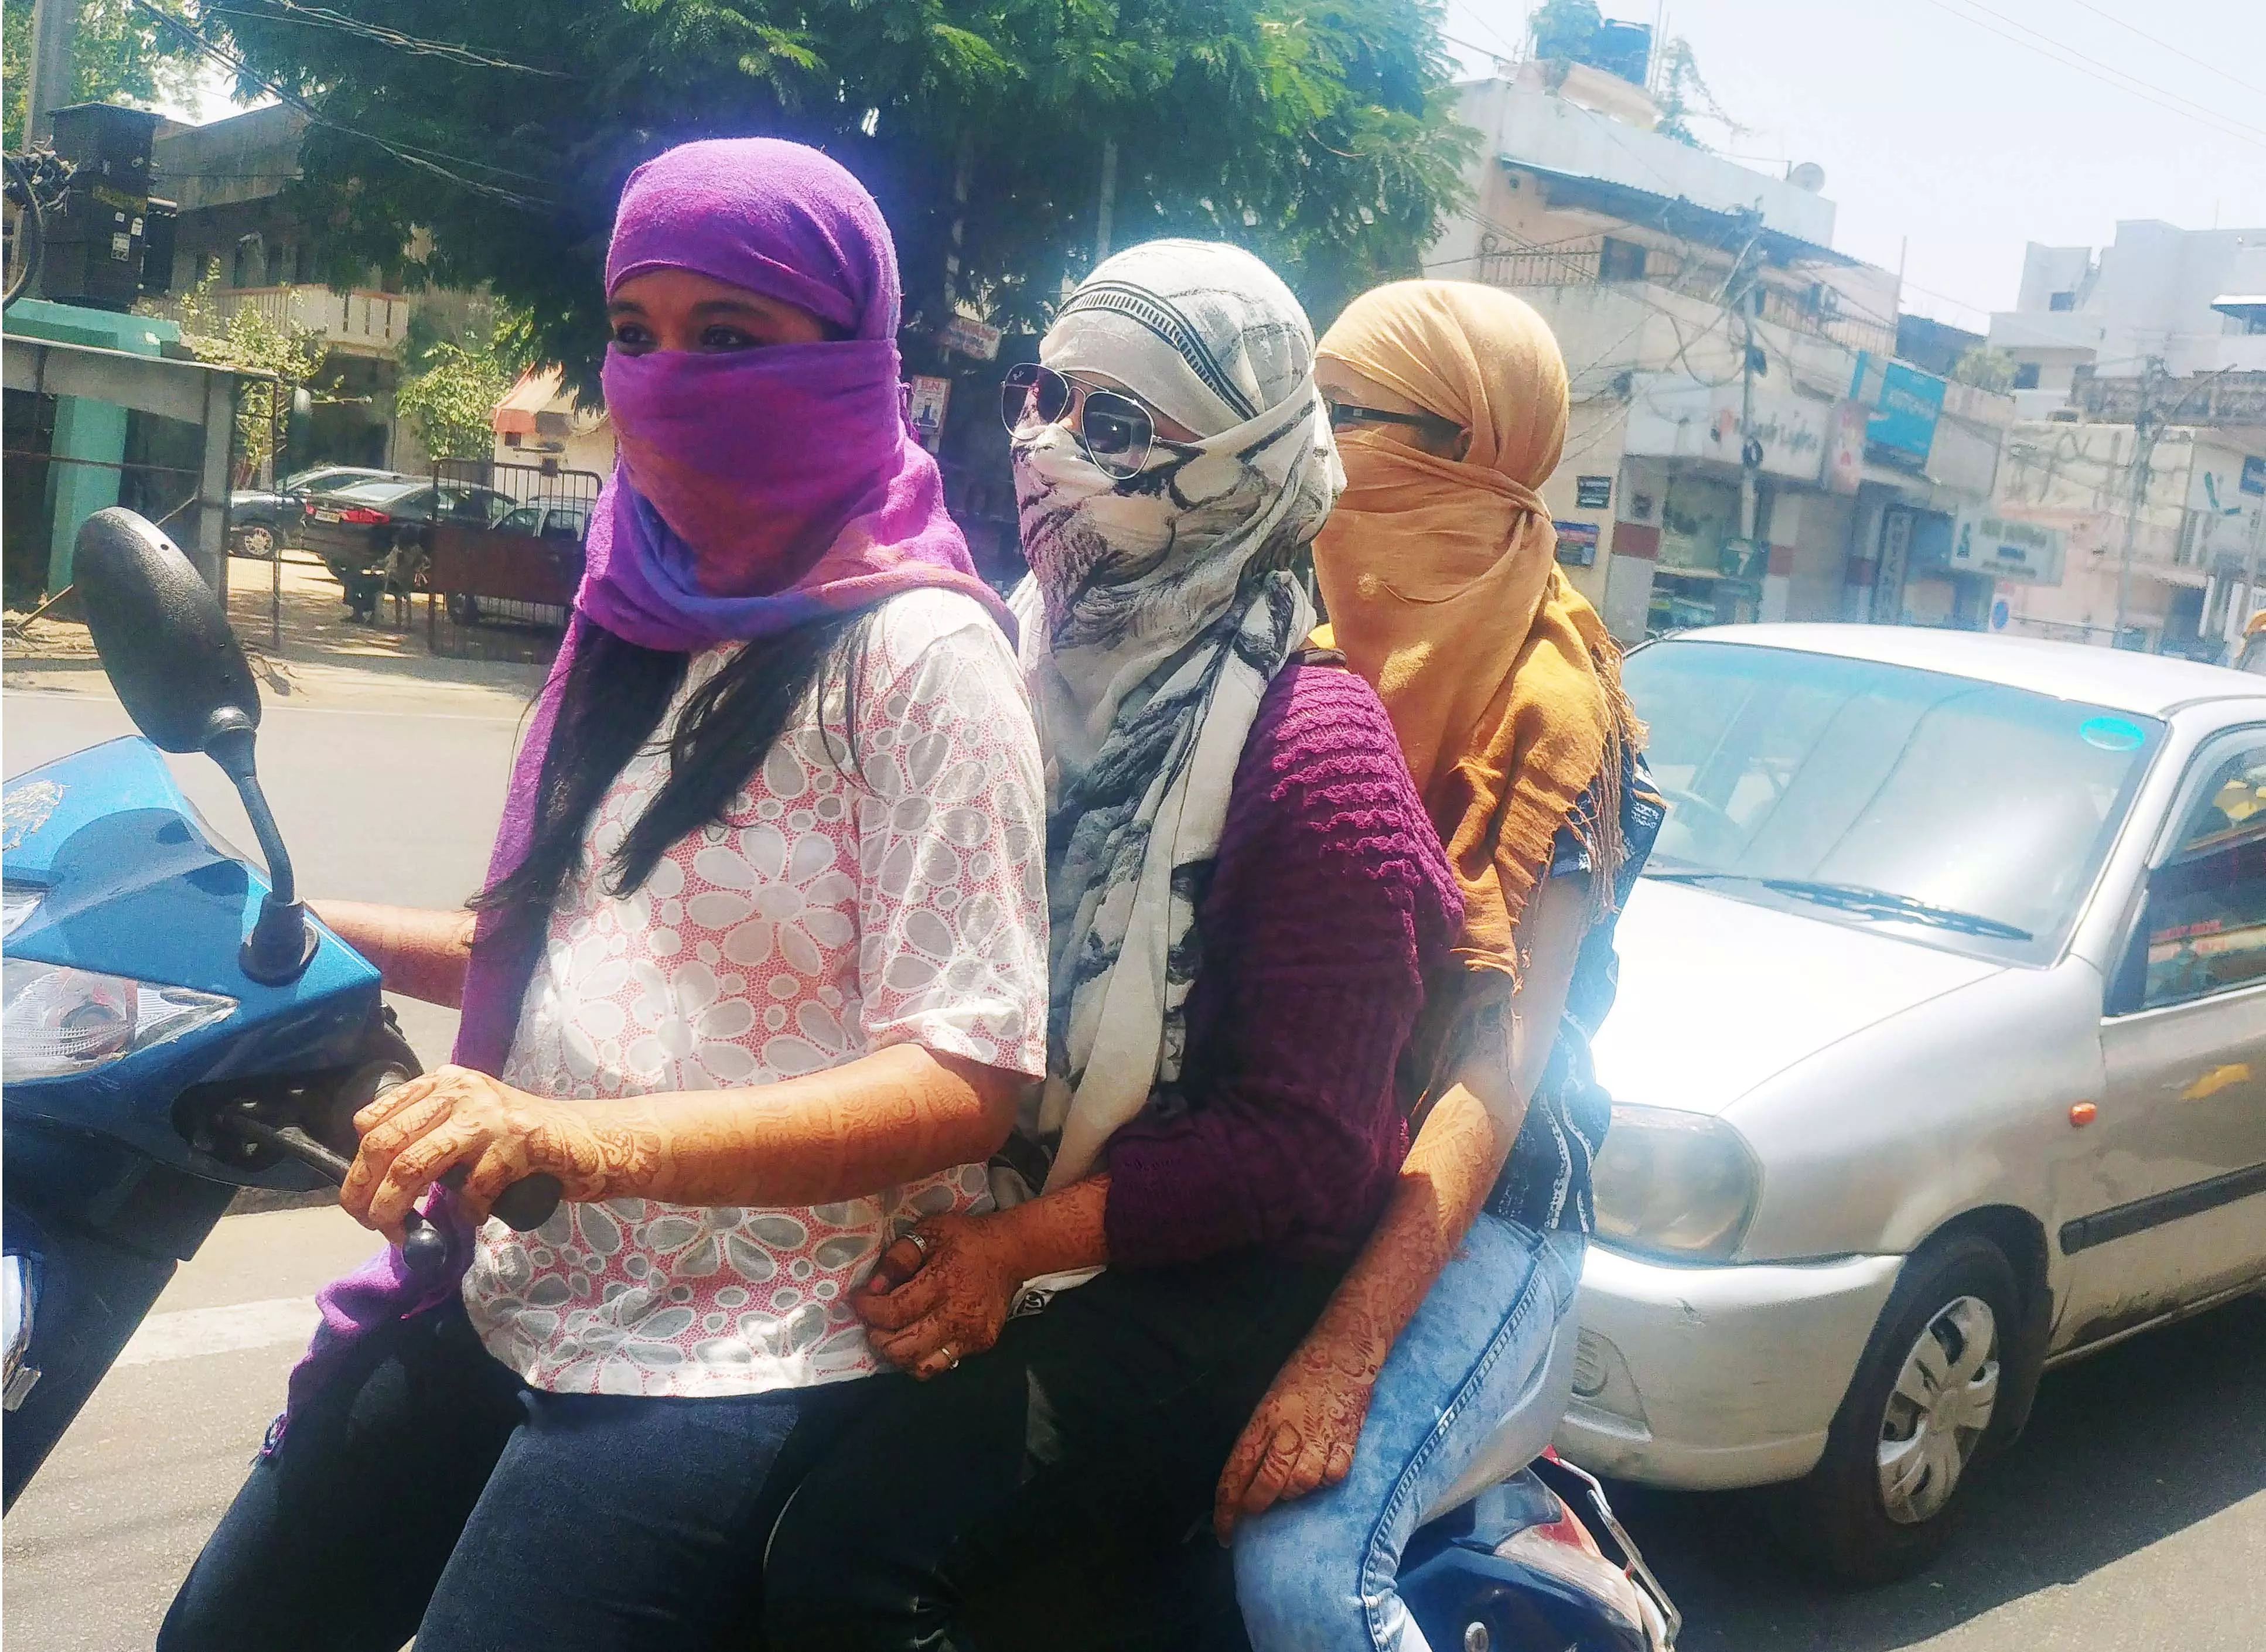 Heatwave warning issued for 8 Maharashtra districts